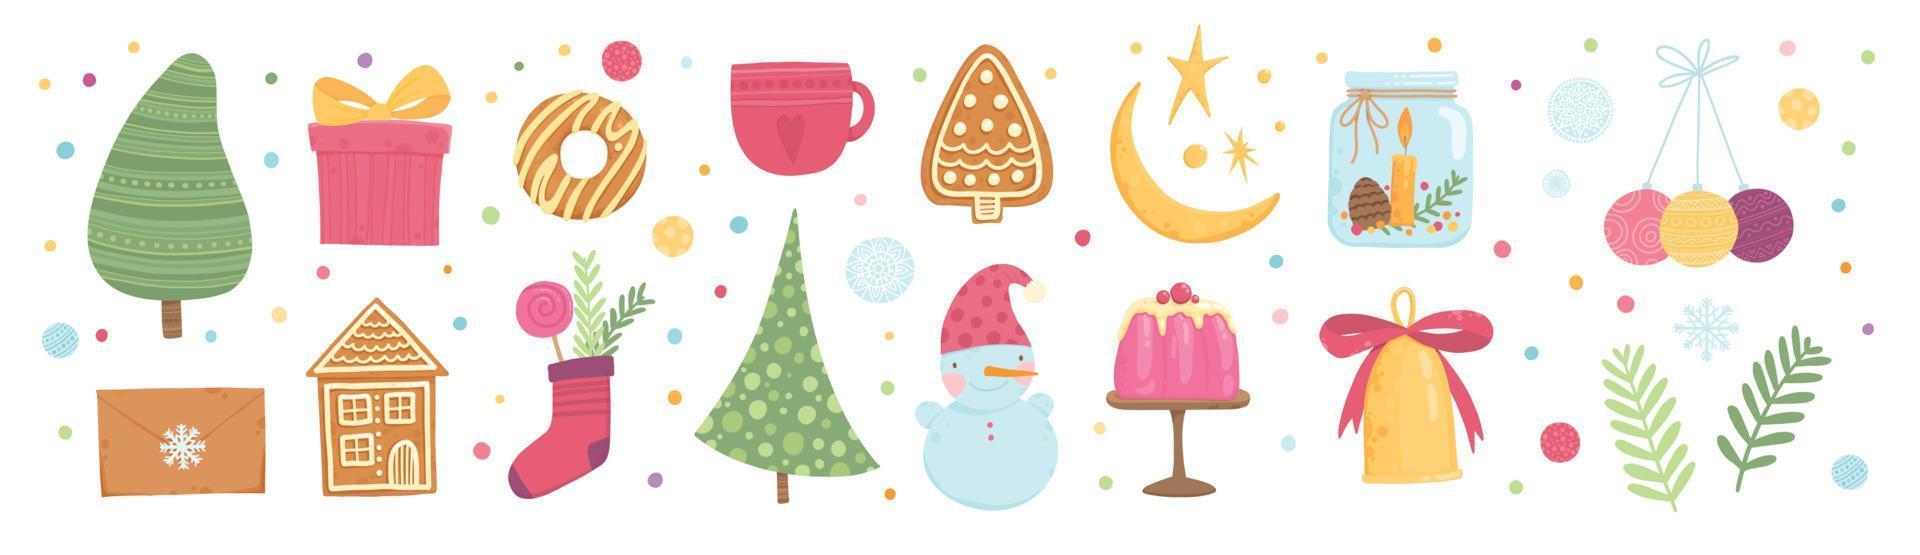 Collection of beautiful baubles and decorations for Christmas tree. Set of holiday ornaments, animals, Santa, snowman, gold bell. Colored vector illustration in flat cartoon style